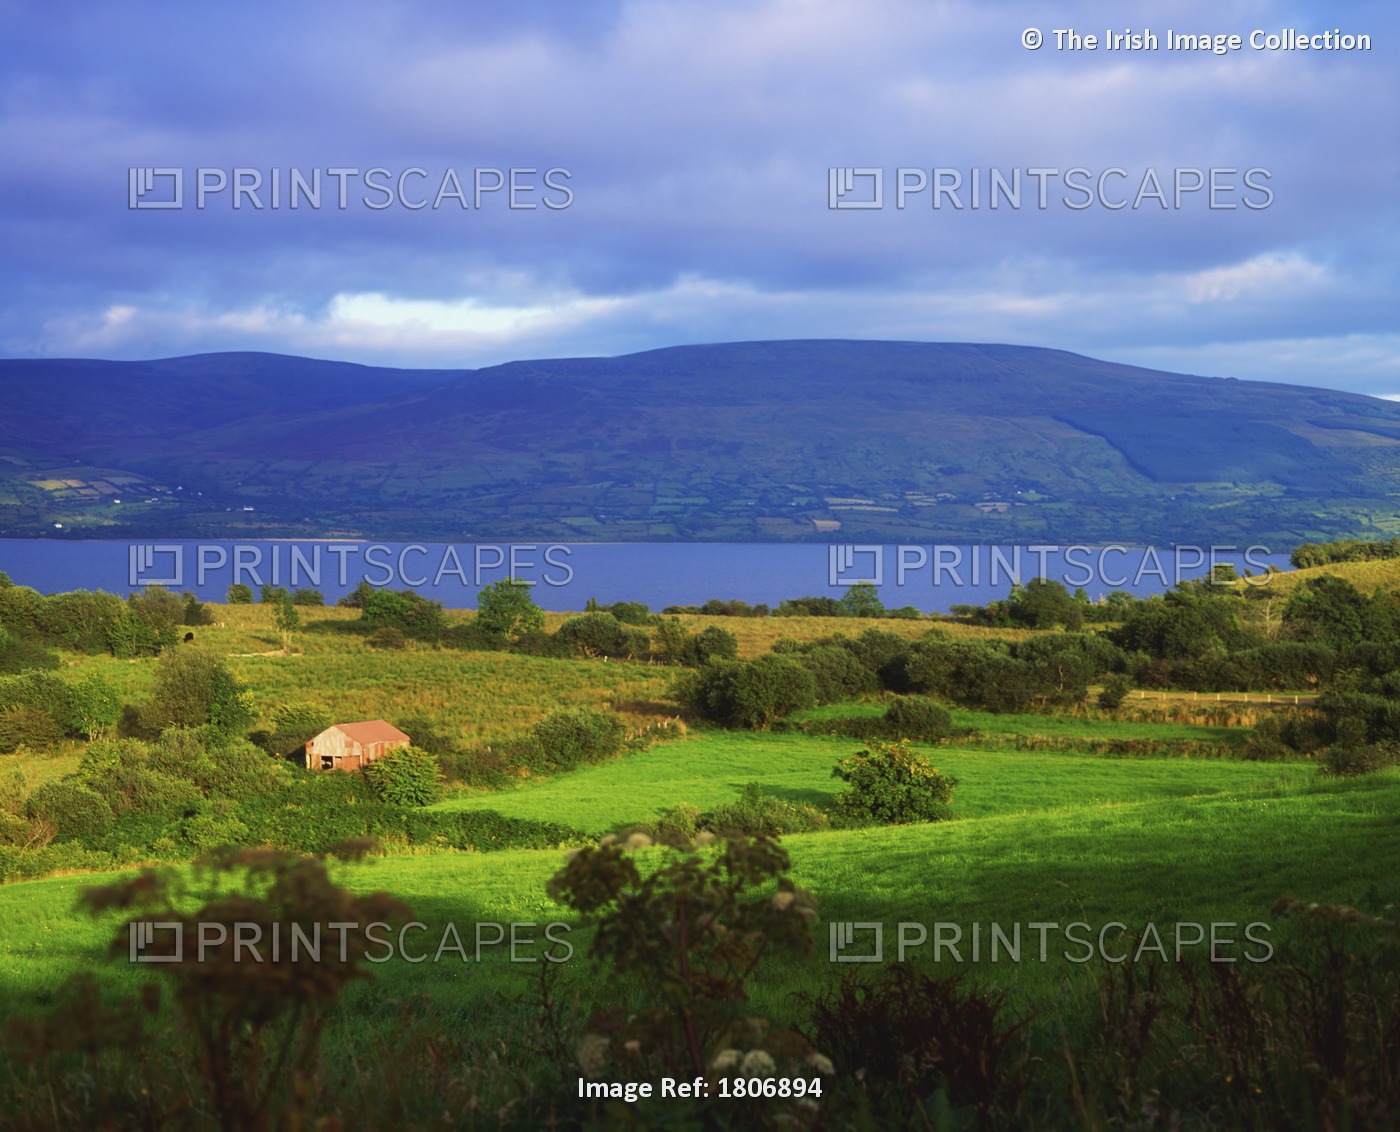 View Of County Leitrim And Lough Allen From County Roscommon, Ireland